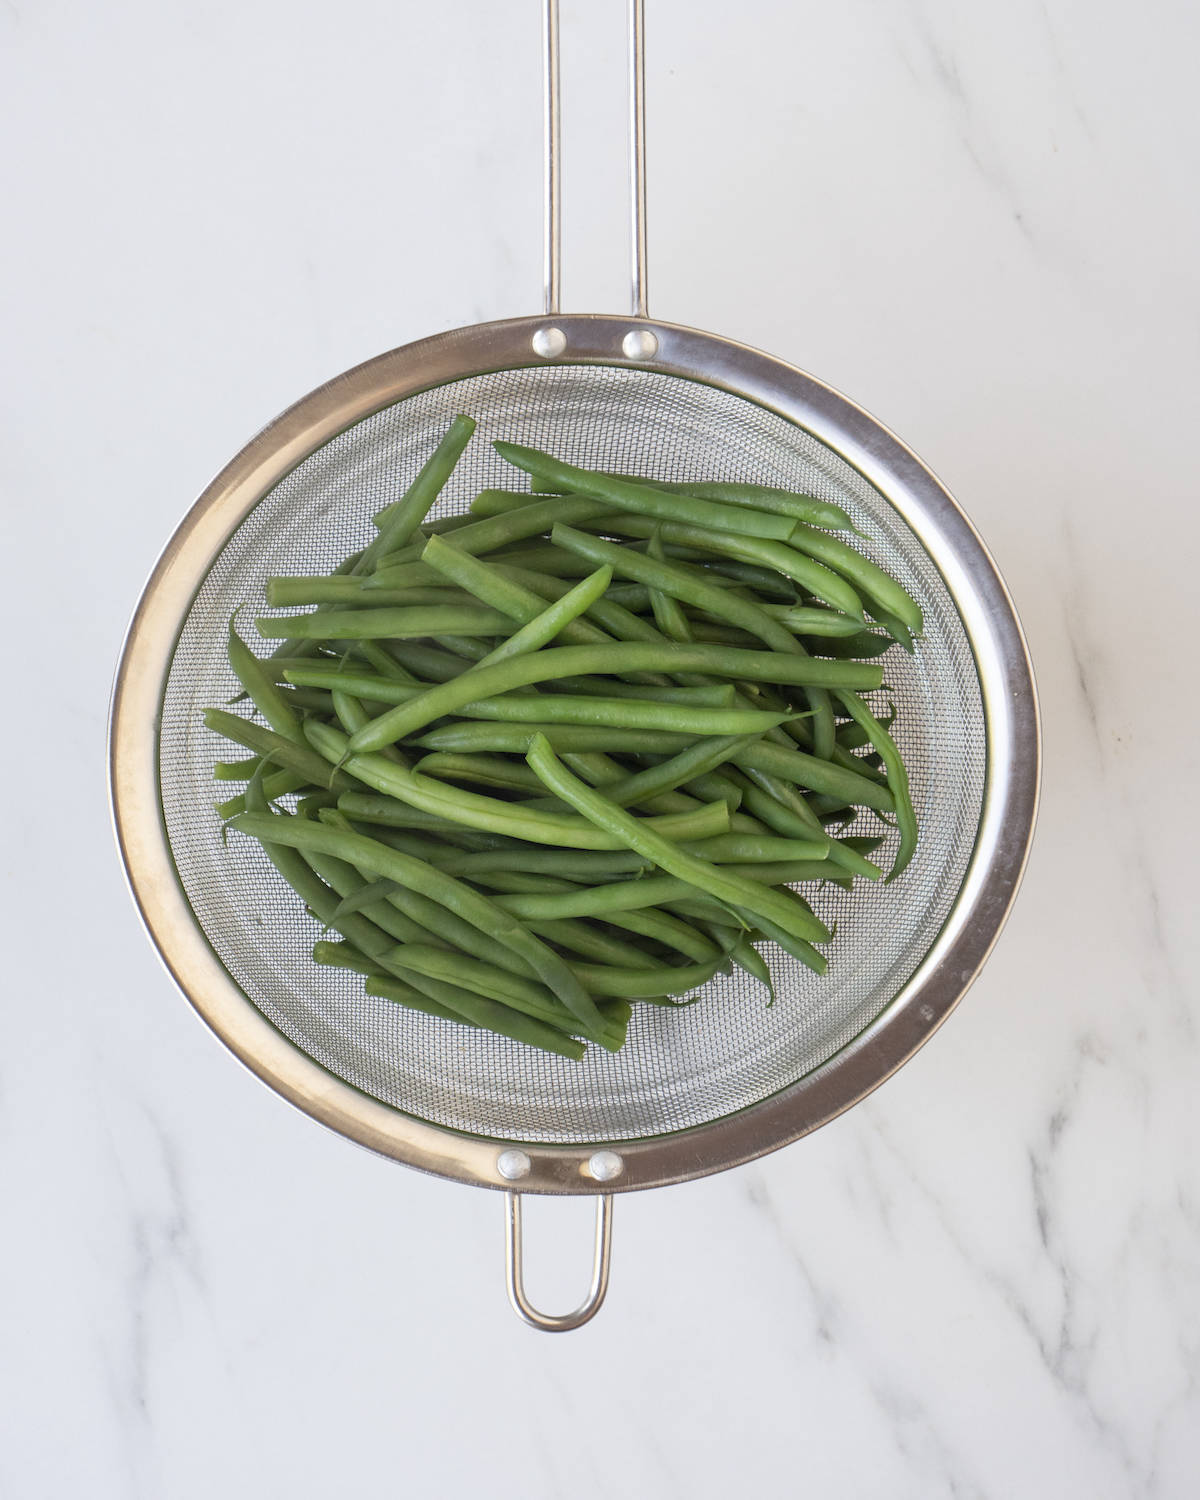 Green beans in a mesh metal strainer on a white countertop.